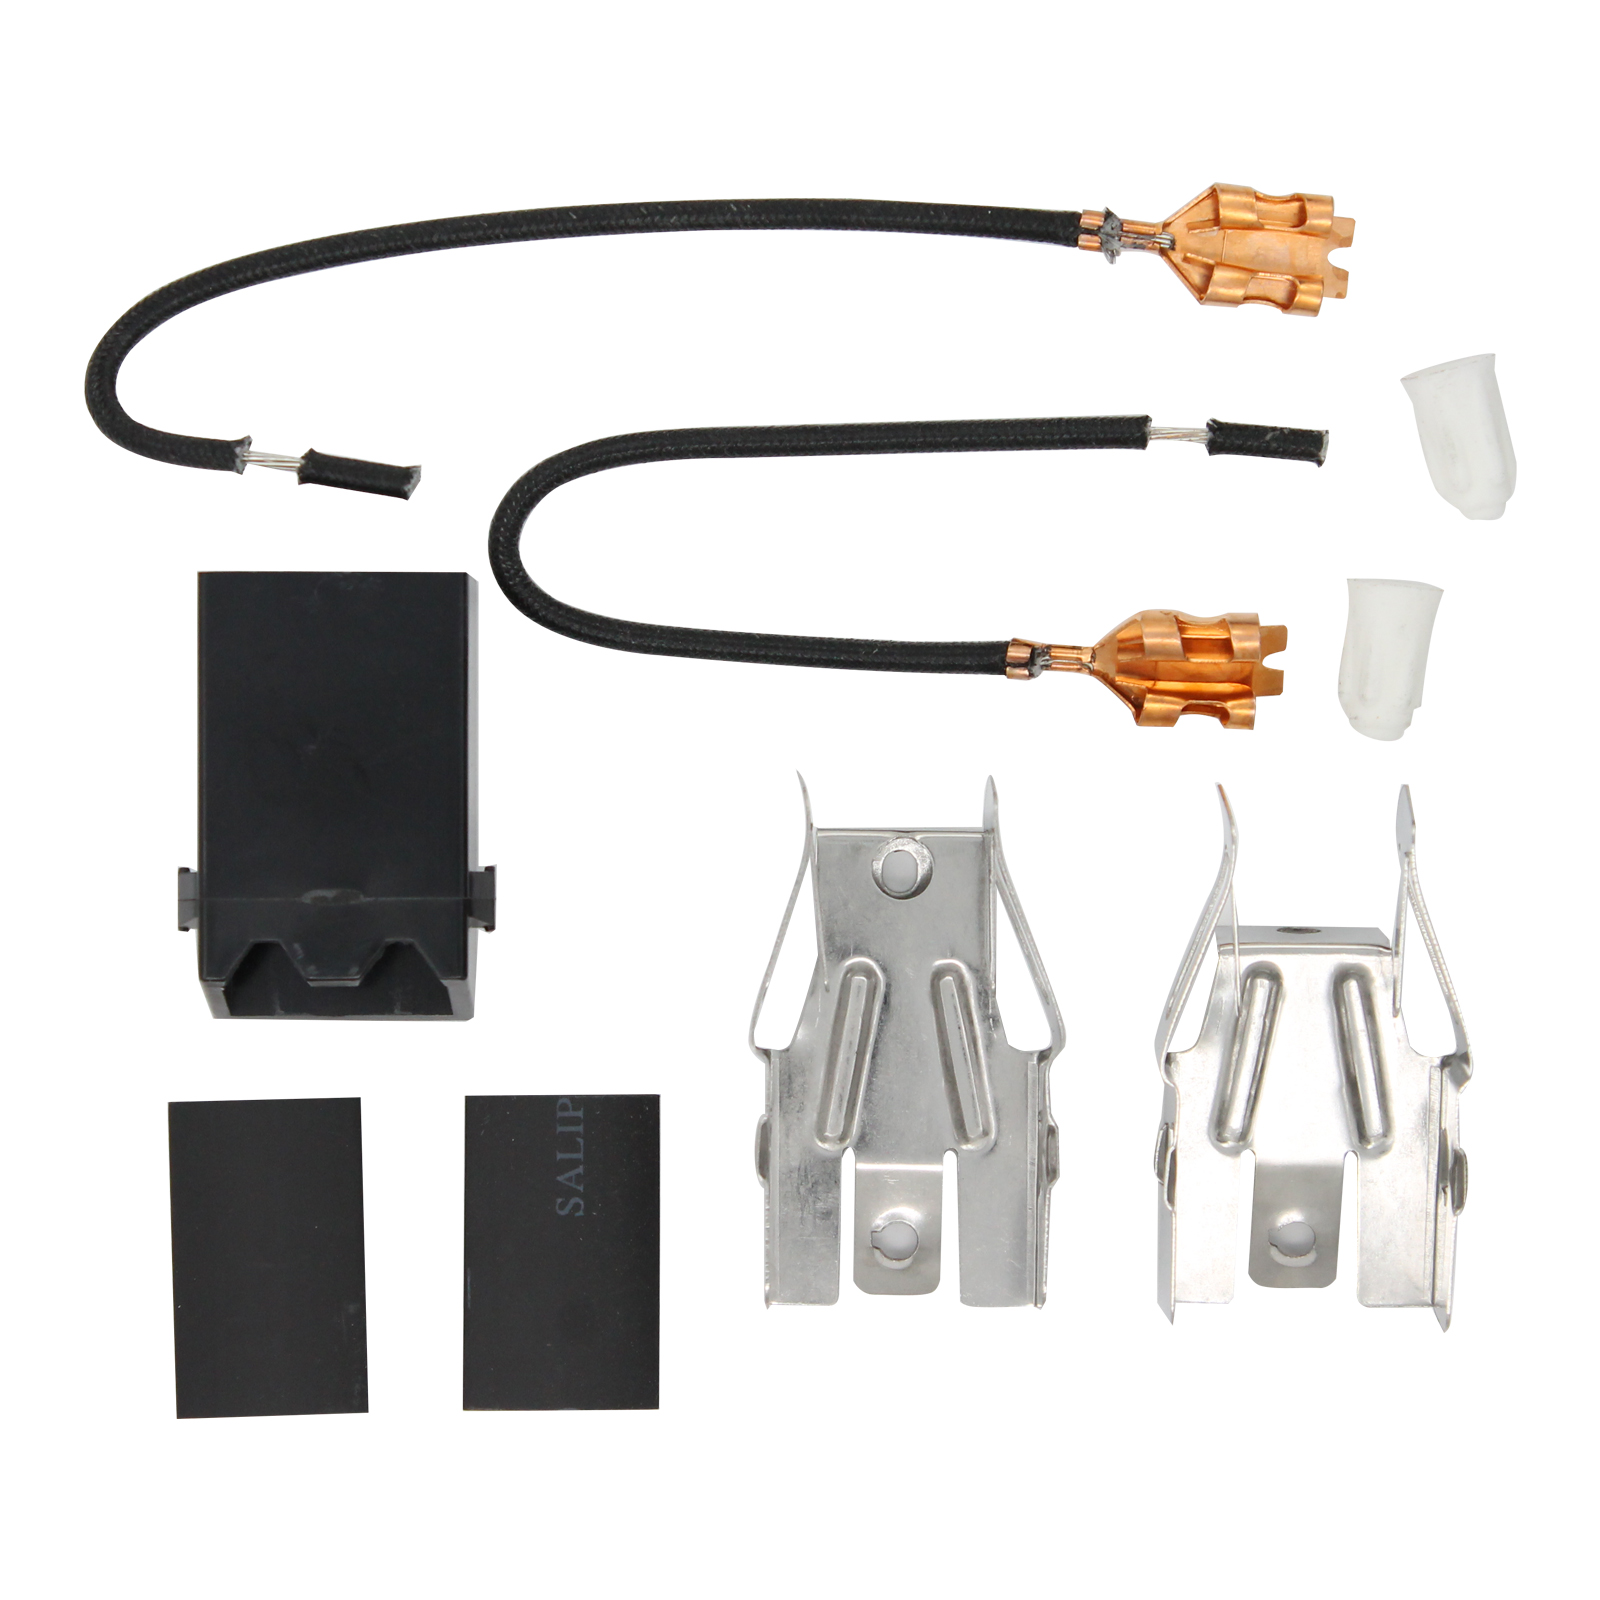 330031 Top Burner Receptacle Kit Replacement for Amana ARS635 (P1130617N) Range/Cooktop/Oven - Compatible with 330031 Range Burner Receptacle Kit - UpStart Components Brand - image 4 of 4